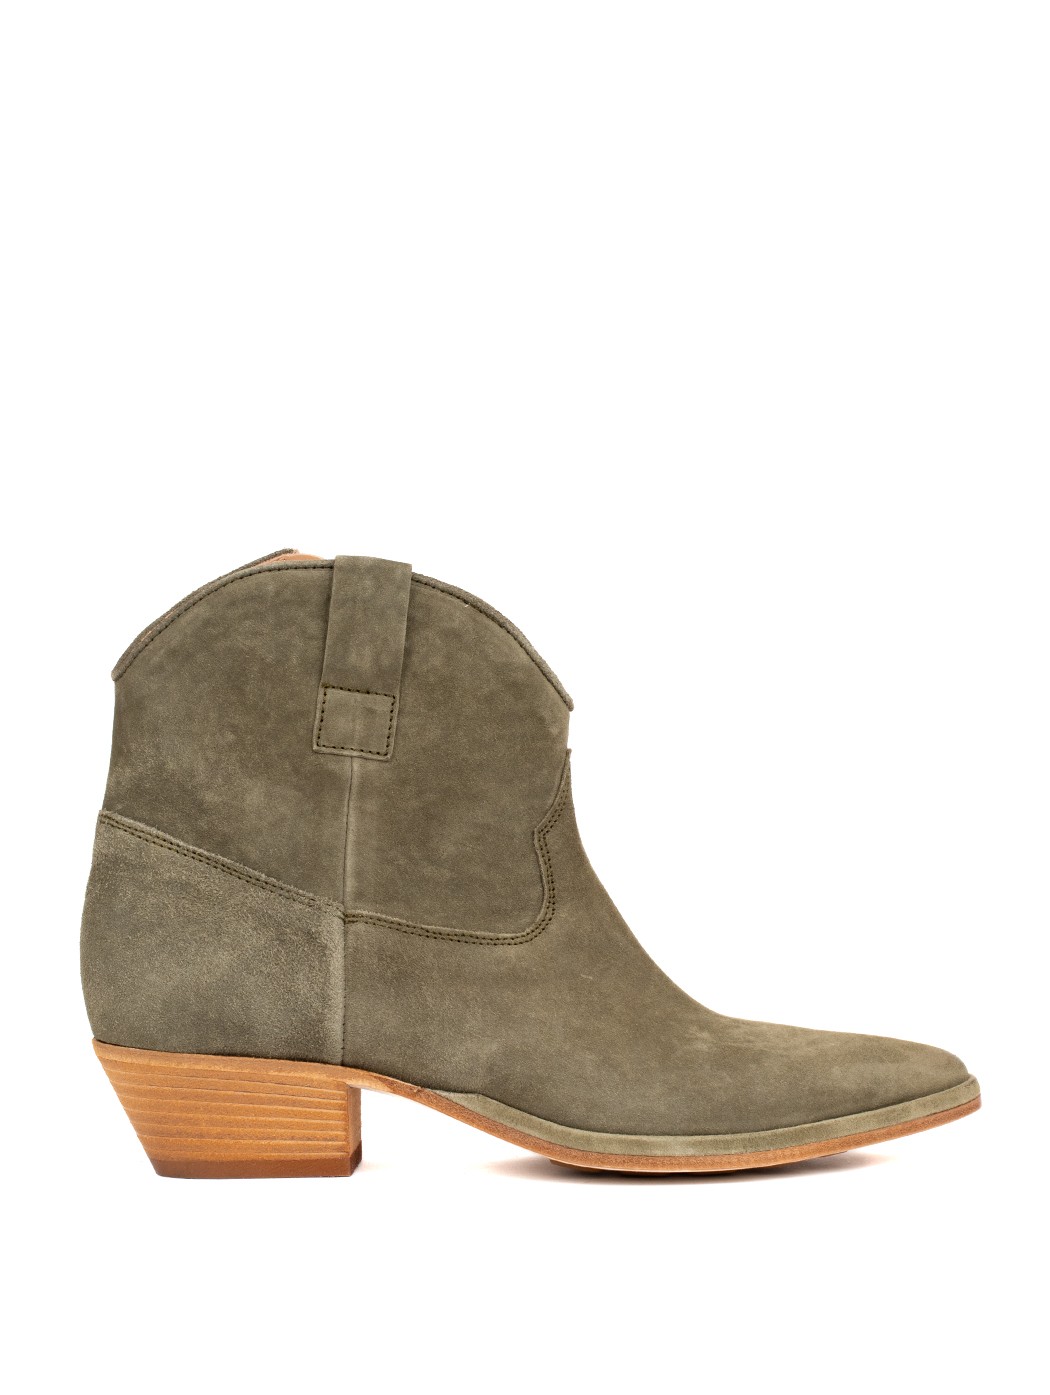 LEMARE 'ankle boot